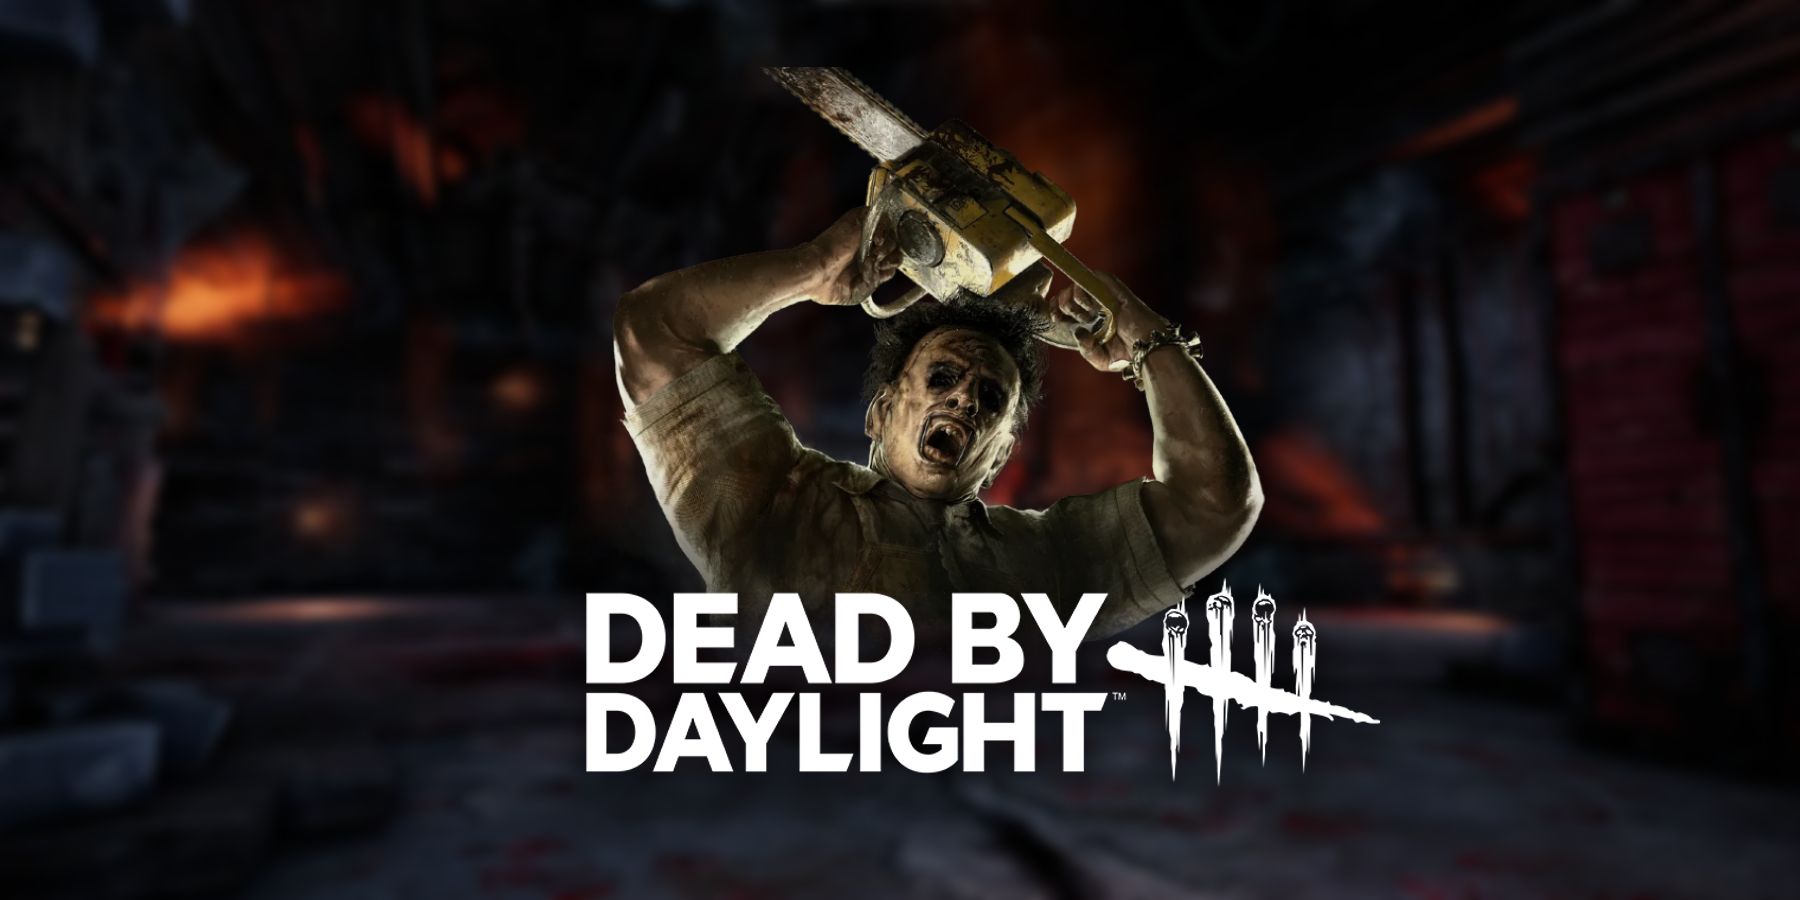 dbd-leatherface-removed-dlc-license-expired-texas-chainsaw-massacre